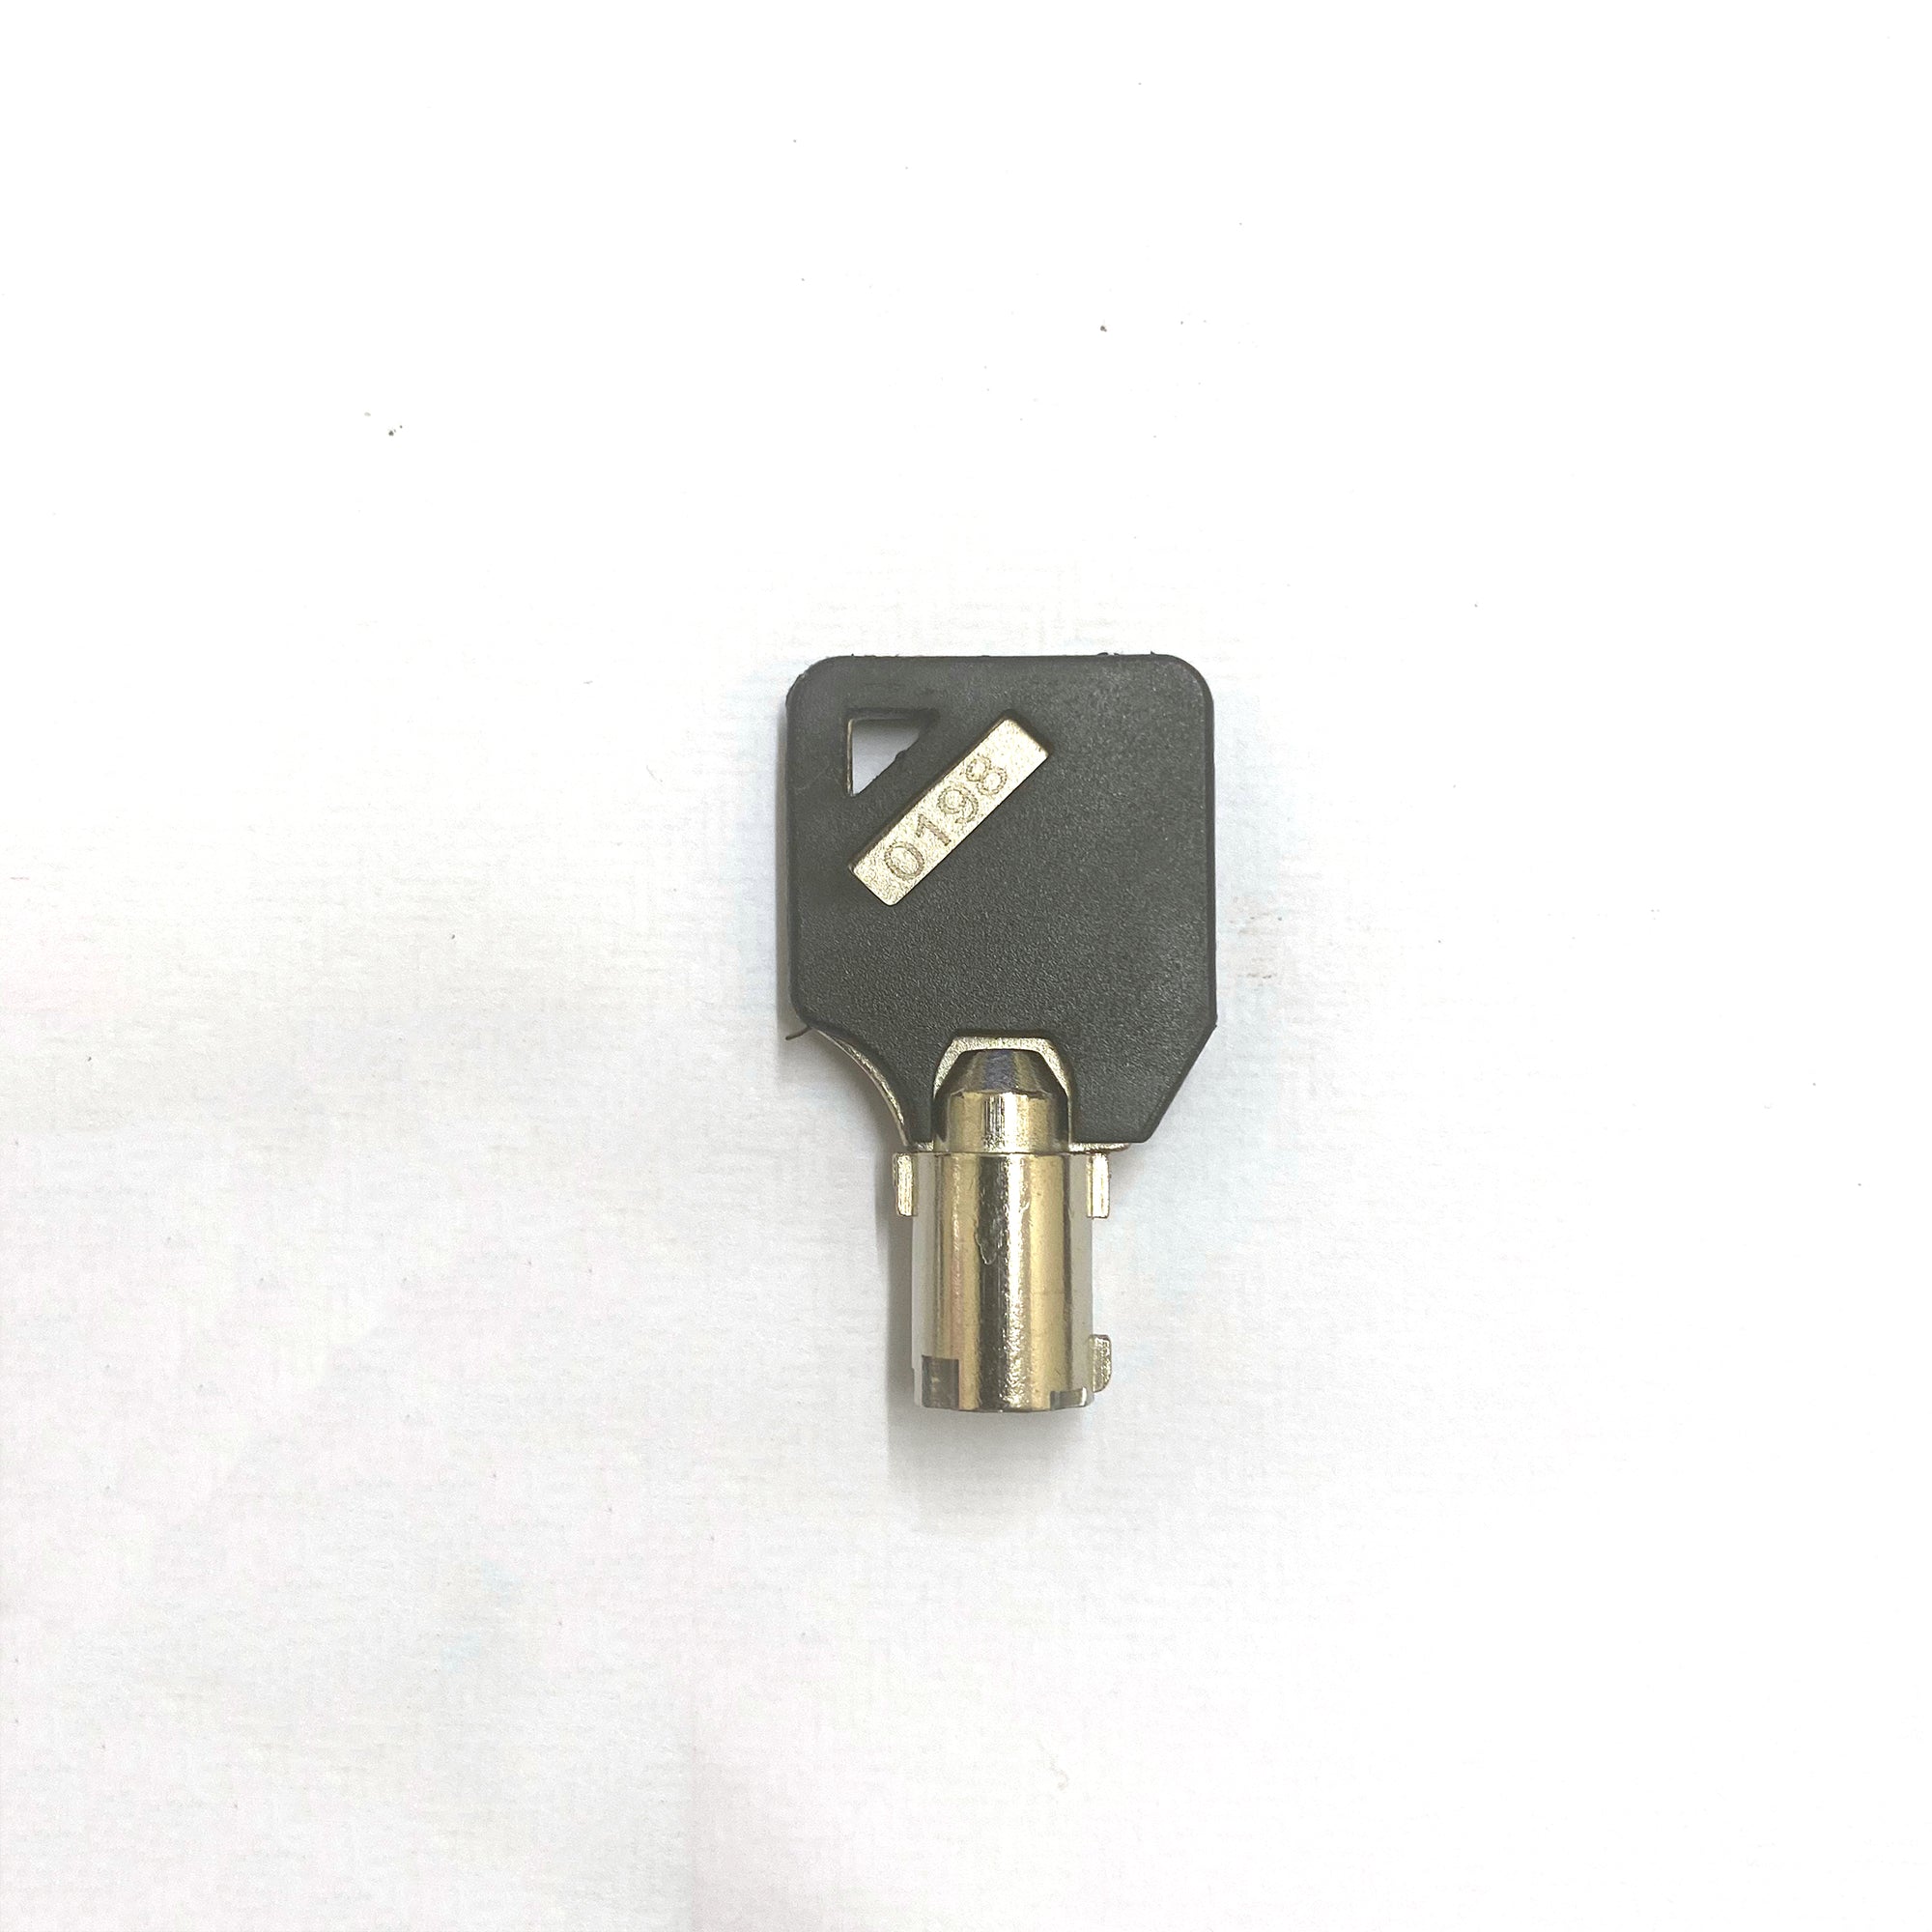 Replacement Key Set for eFOLDI Scooter MK1.5